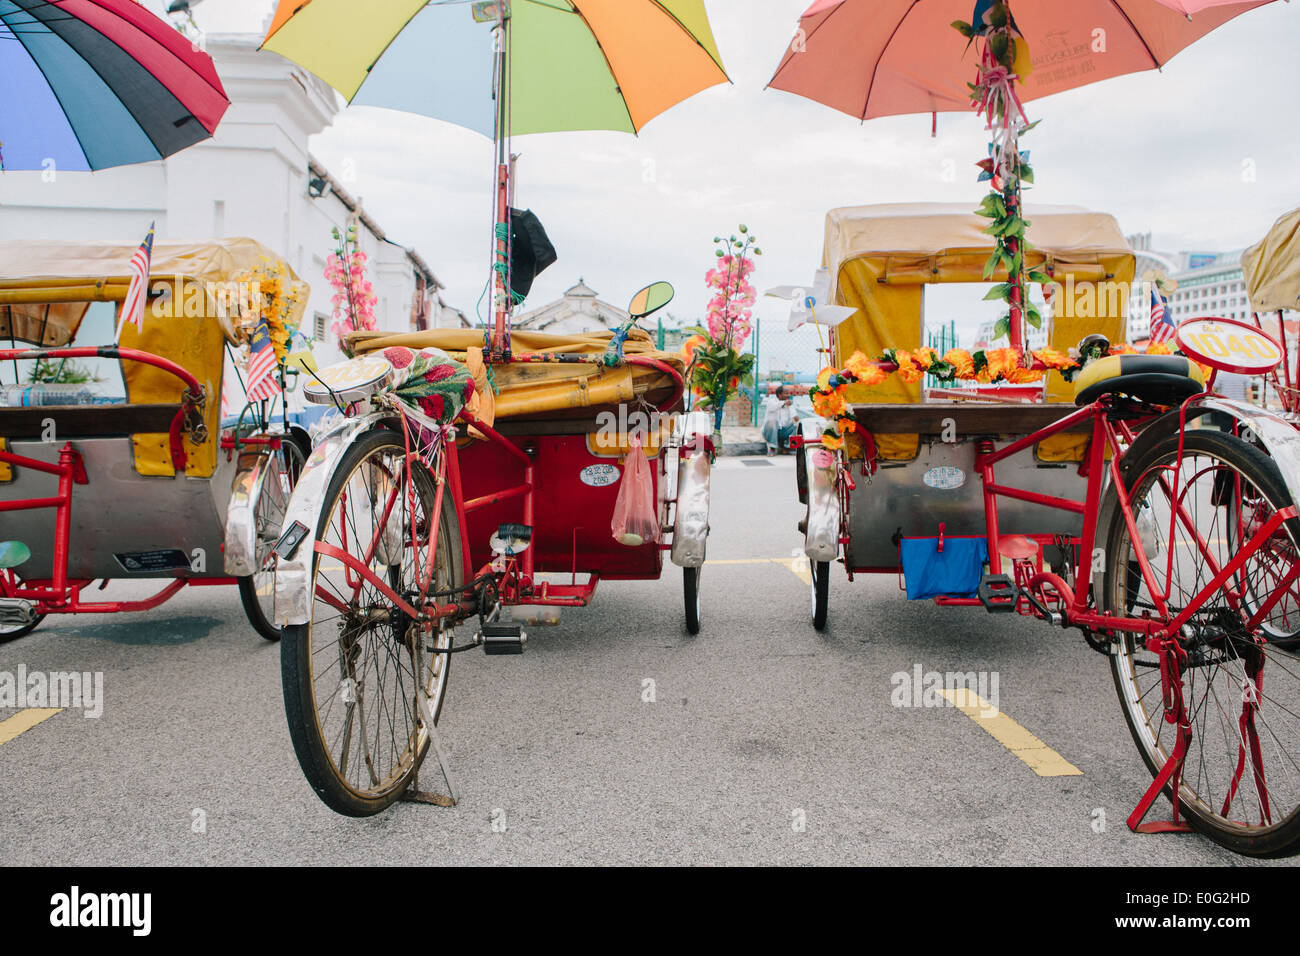 Behind two trishaws with colorful umbrellas looking out. Stock Photo